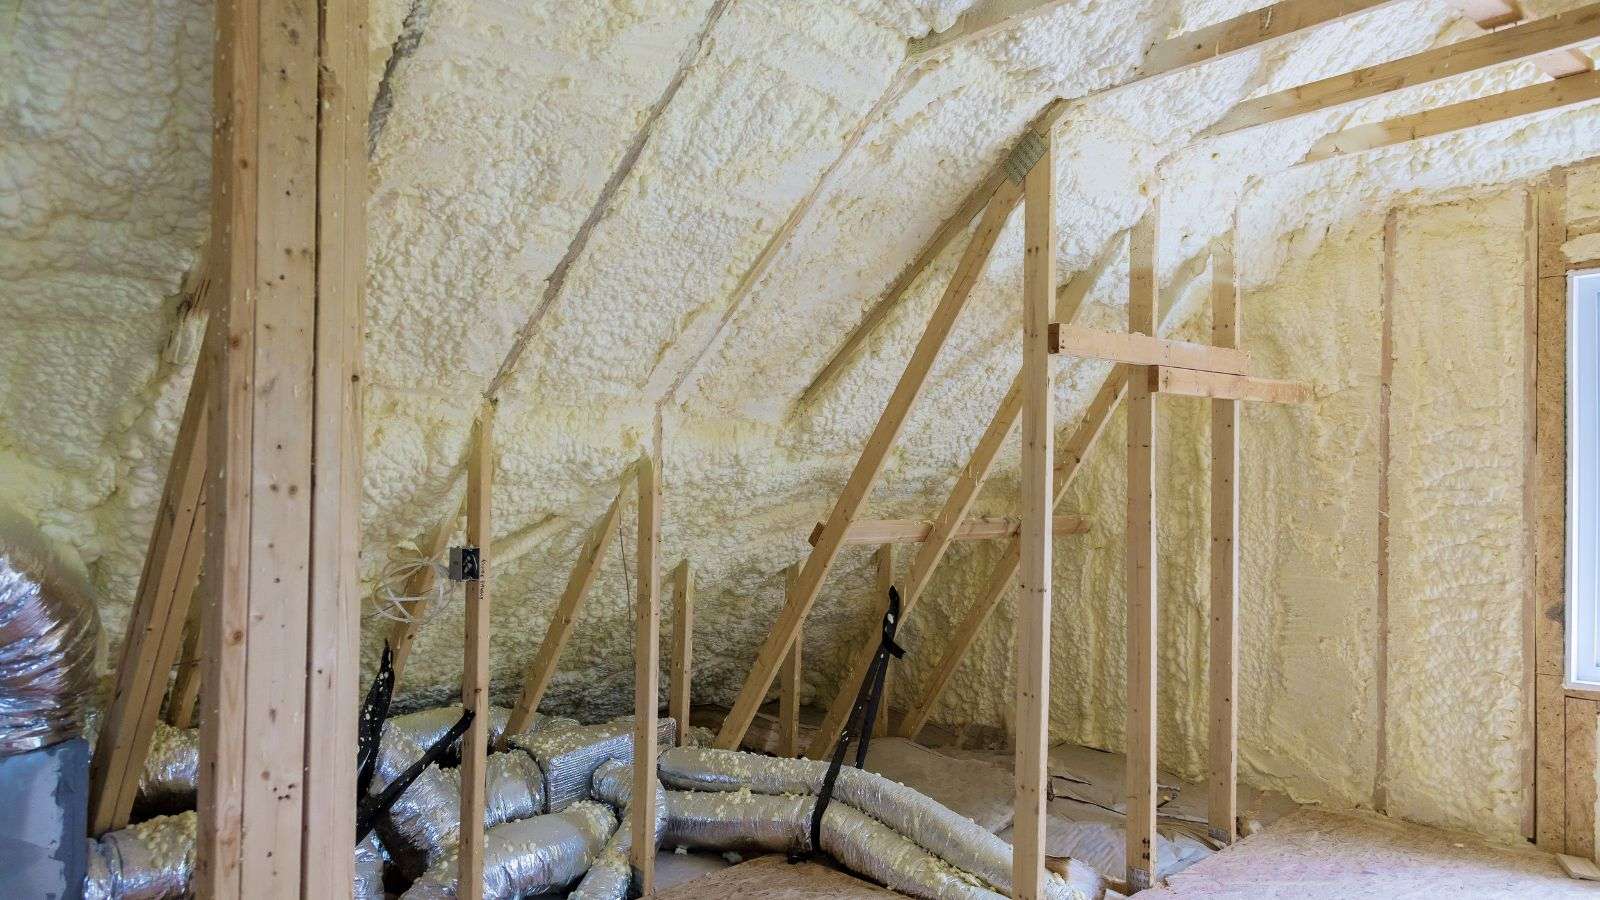 durability of roofs with unfinished attic - bighomeprojects.com